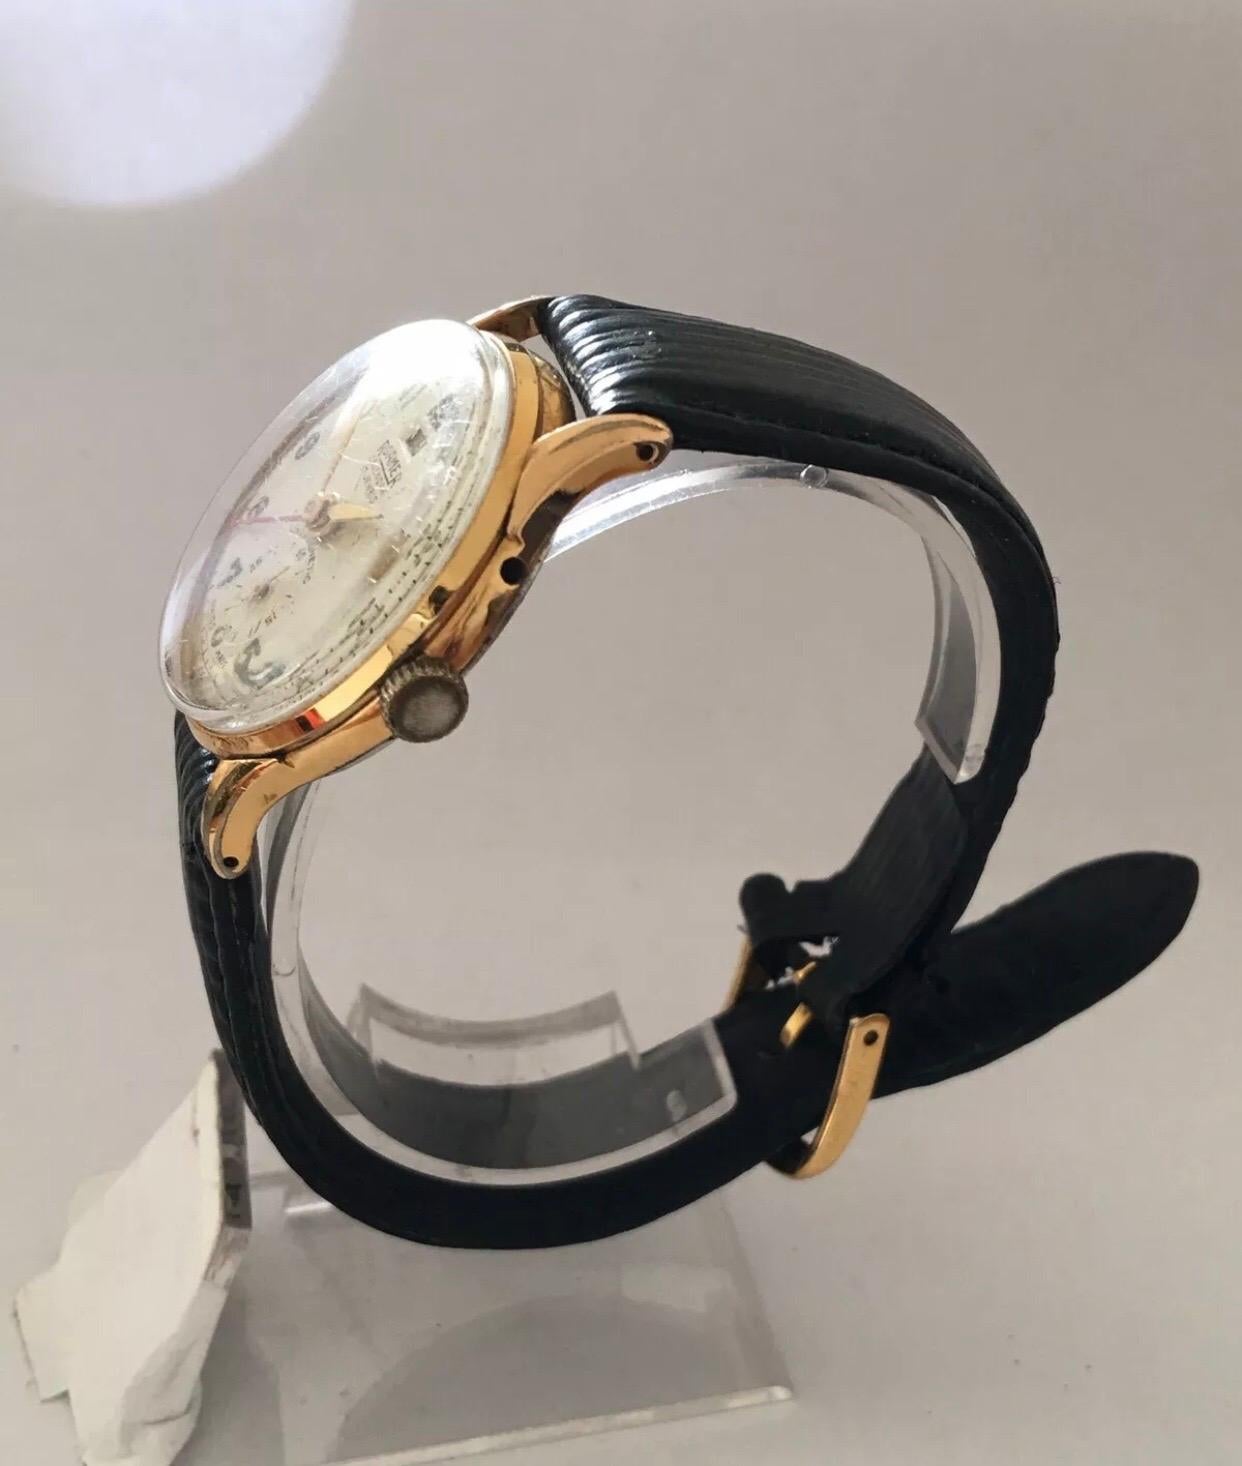 roamer watches old model price